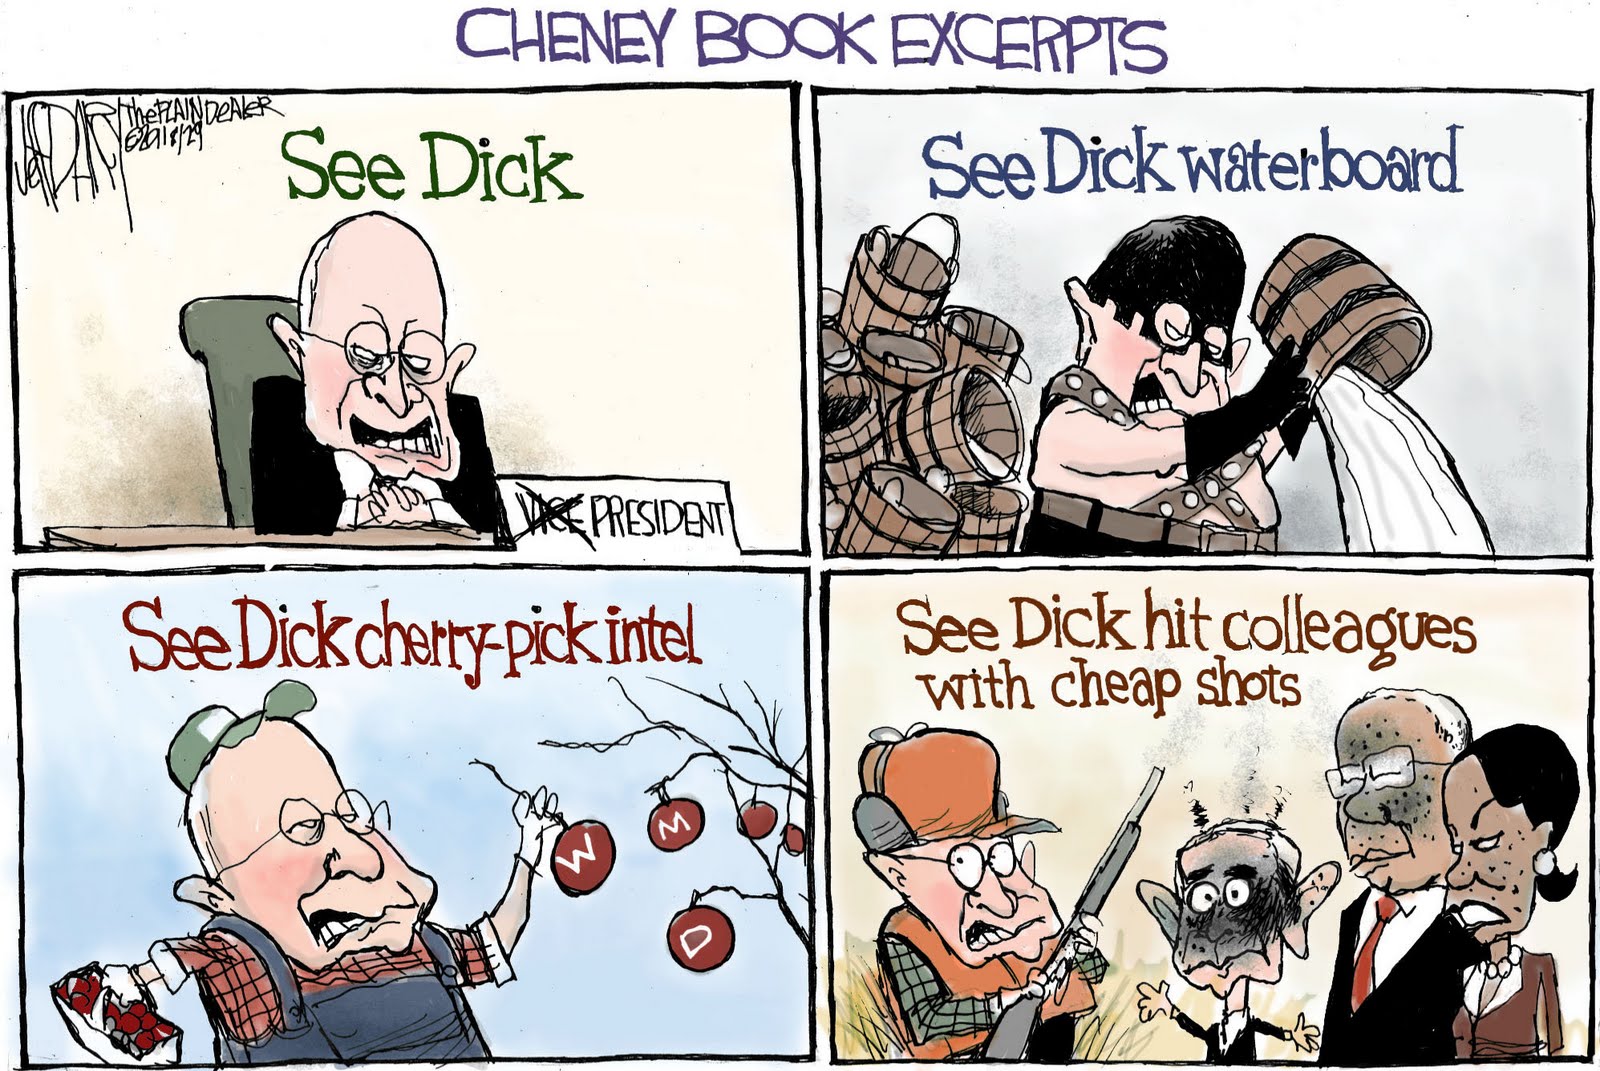 Dick cheney executed